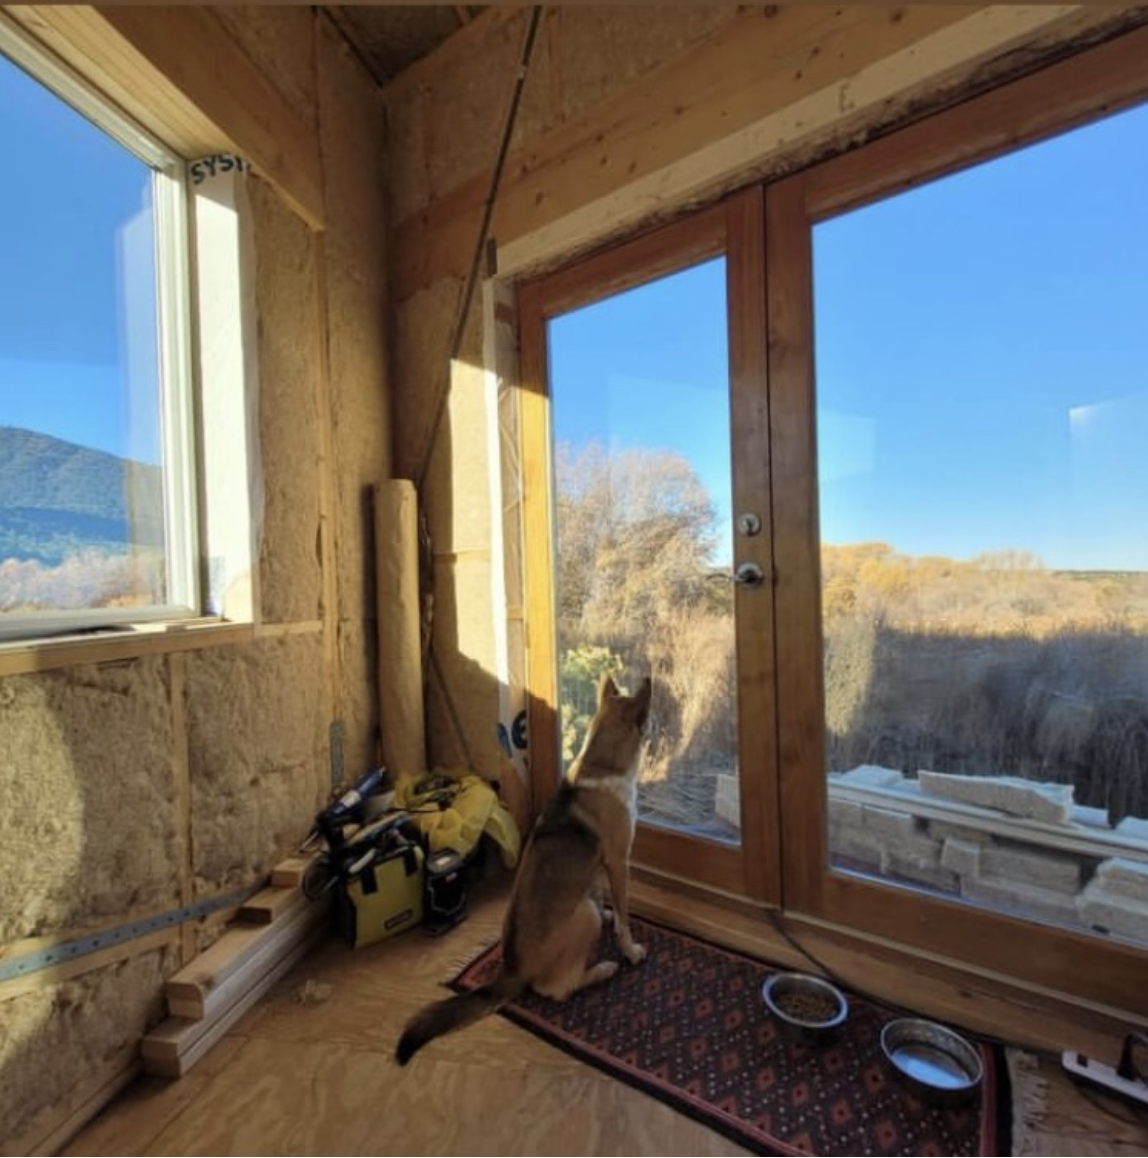 DIY home shed project utilizes hempwool insulation that is shown exposed in the walls and a dog looking out a window